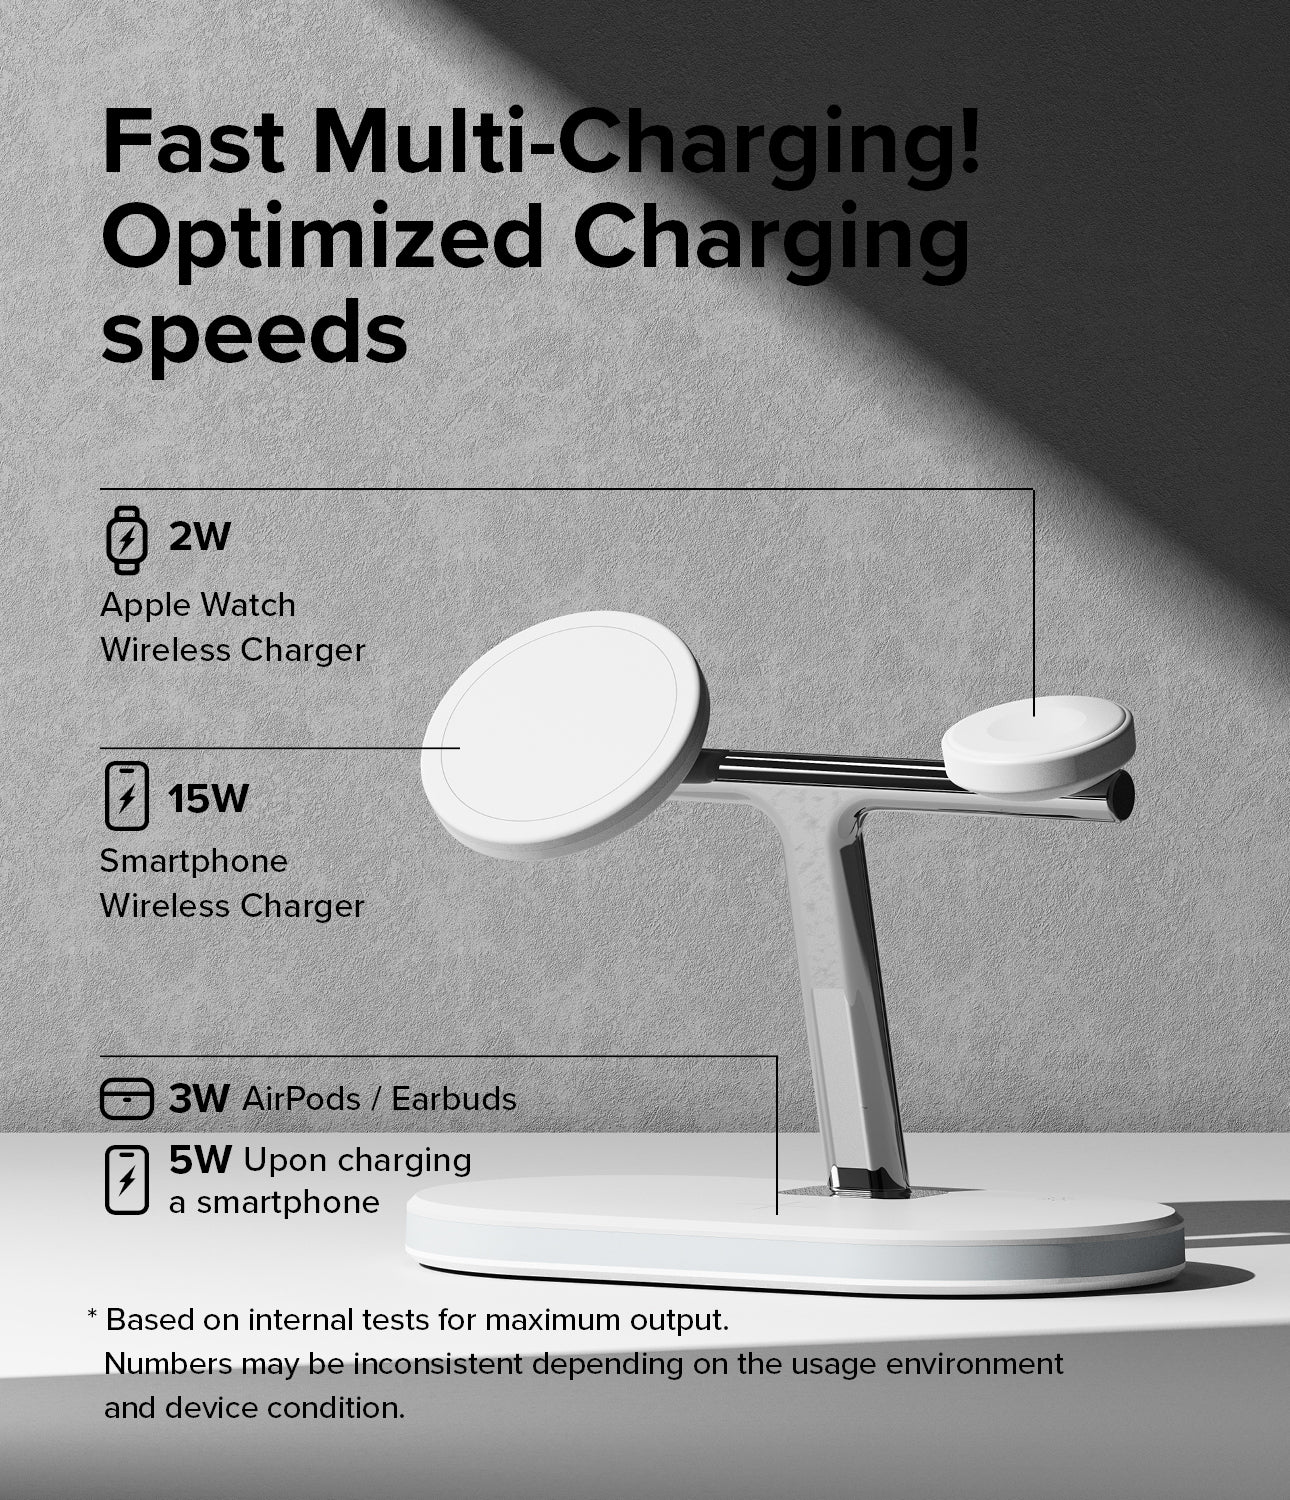 Ringke 3-in-1 Wireless Charger Stand - Fast Multi-Charging! Optimized Charging Speeds. 2W Apple Watch Wireless Charger. 15W Smartphone Wireless Charger. 3W AirPods / Earbuds. 5W Upon charging a smartphone.